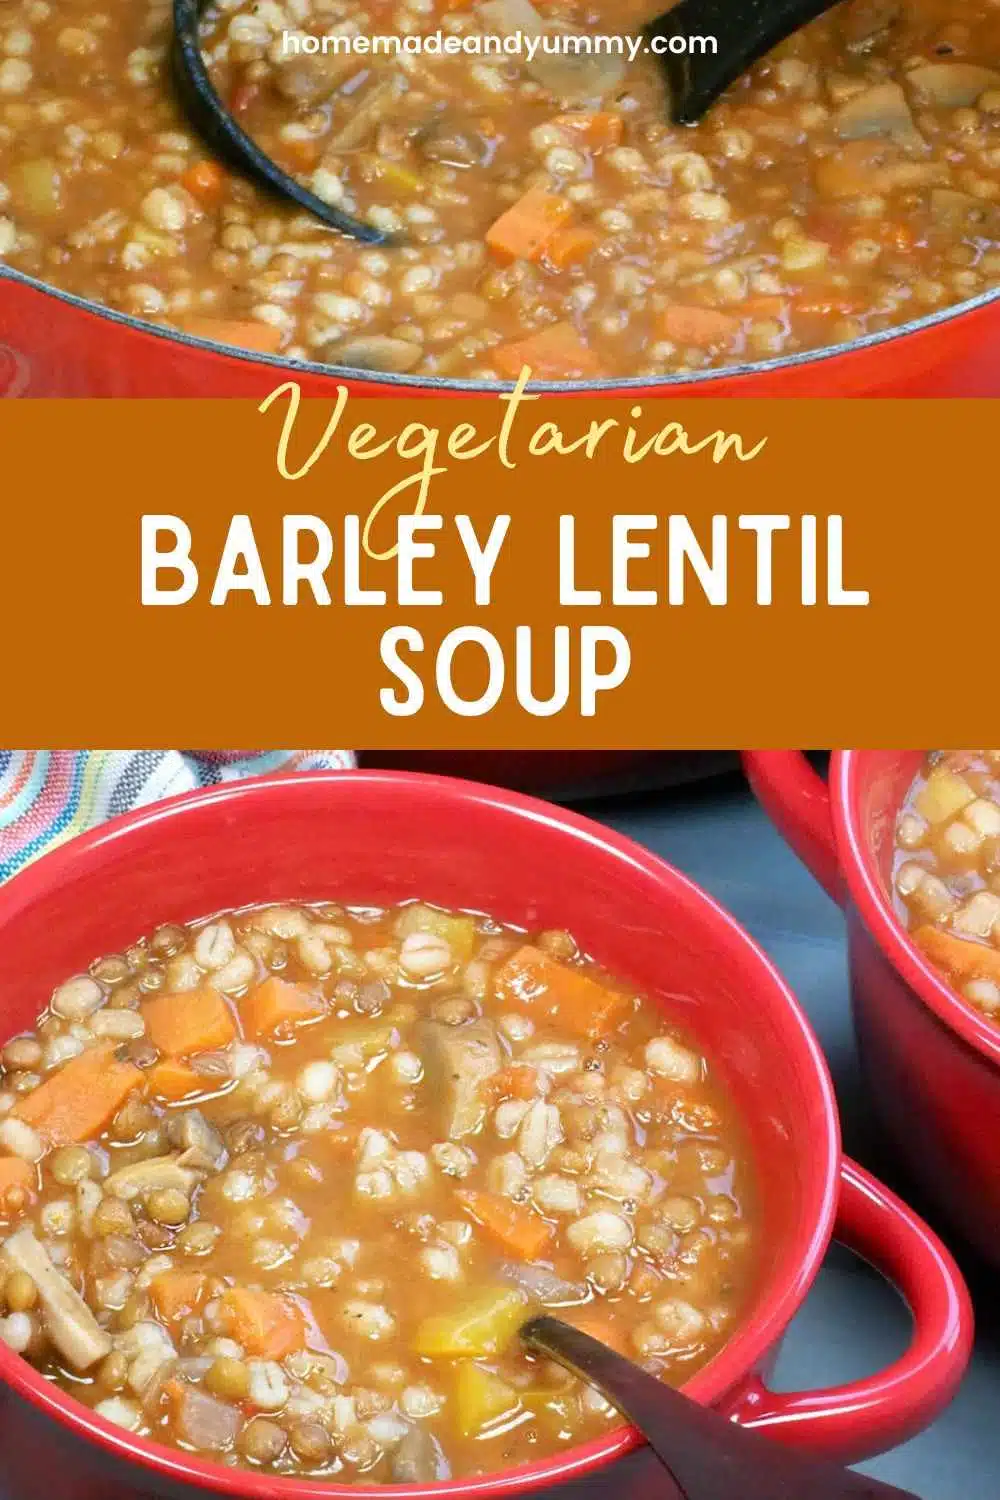 Vegetarian Soup with Barley and Lentils for dinner.